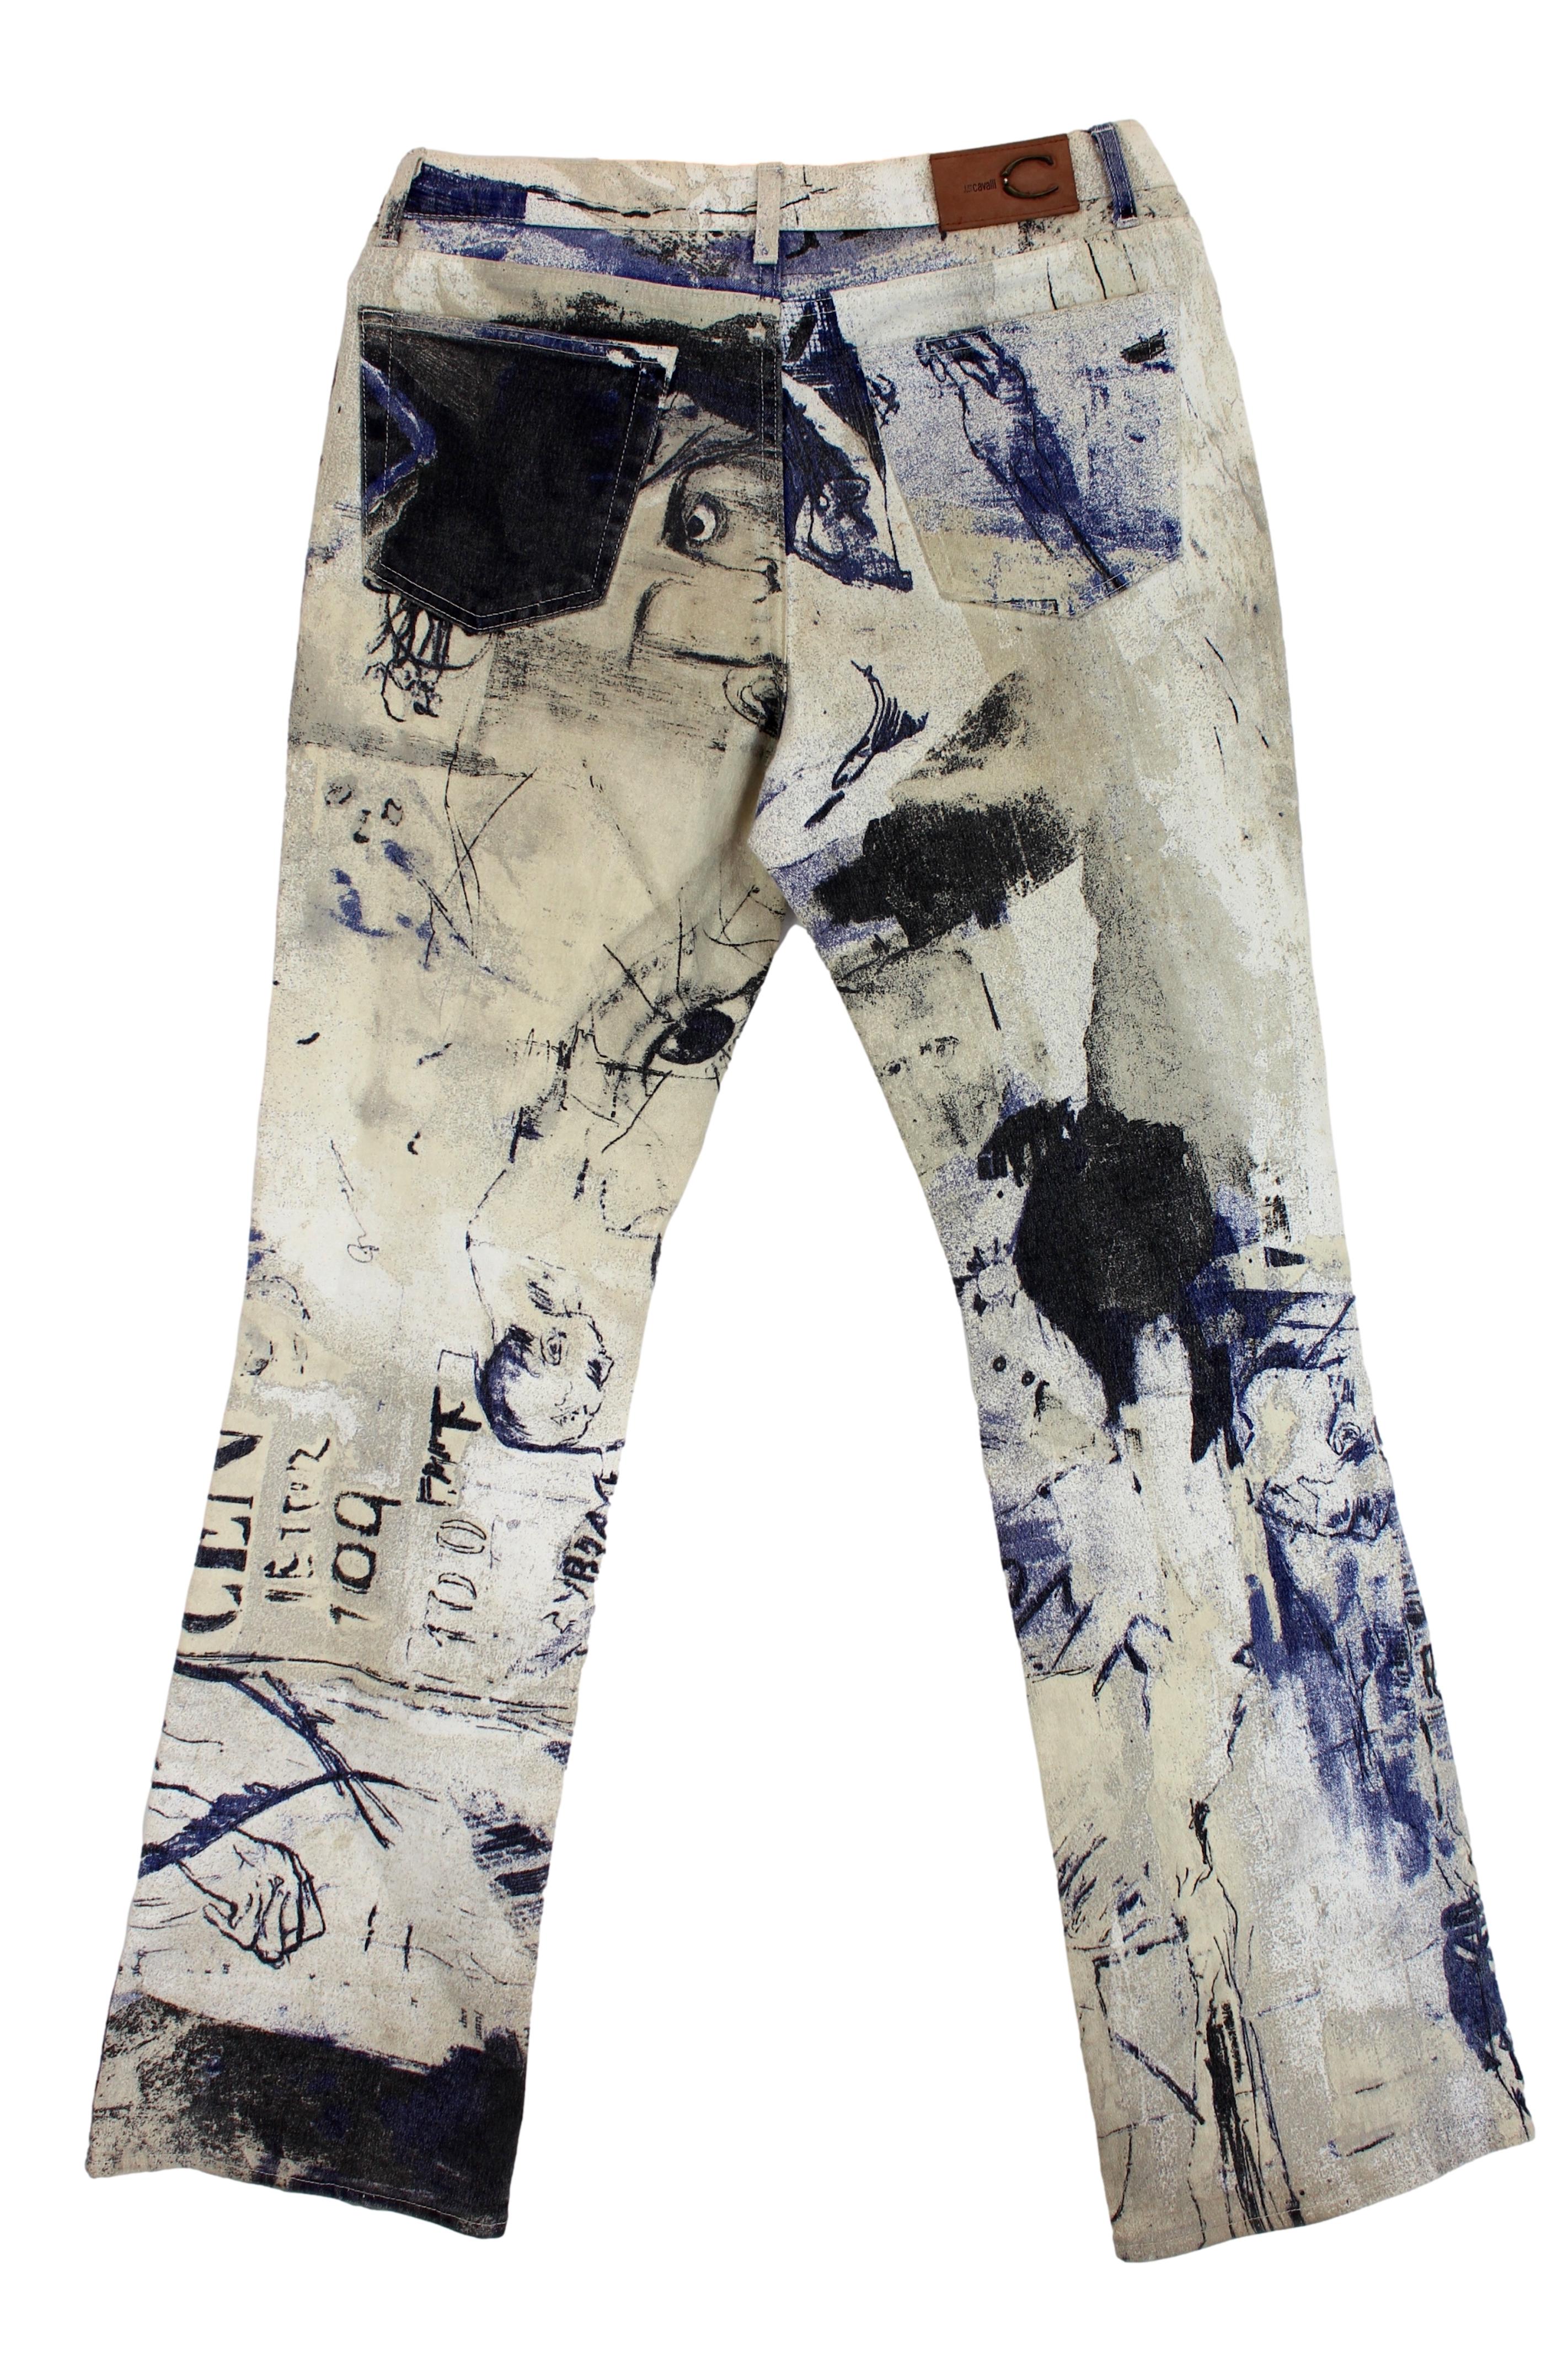 Just Cavalli 2000s vintage men's trousers. Jeans with Napoleon print, classic 5-pocket model with bell-bottoms. Blue and beige color, 98% cotton 2% other fibers fabric. Made in Italy.

Condition: Excellent

Article used few times, it remains in its